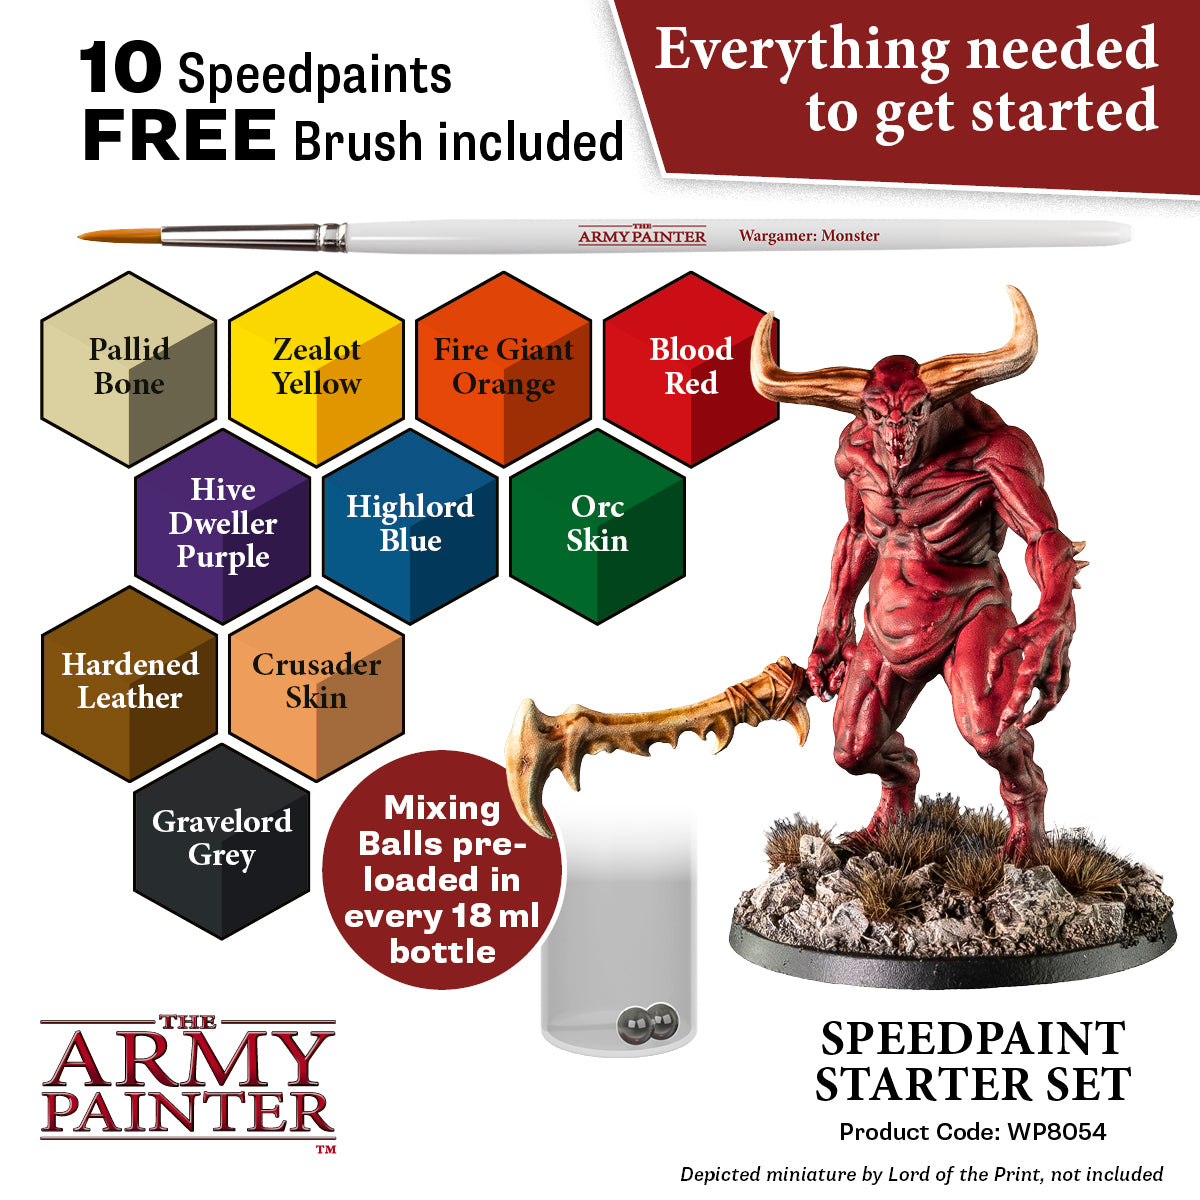  The Army Painter Speedpaint Mega Set - 24 x 18ml Speed Paint  Kit Pre Loaded with Mixing Balls and 1 Brush- Base, Shadow and Highlight in  One Miniature and Plastic Model